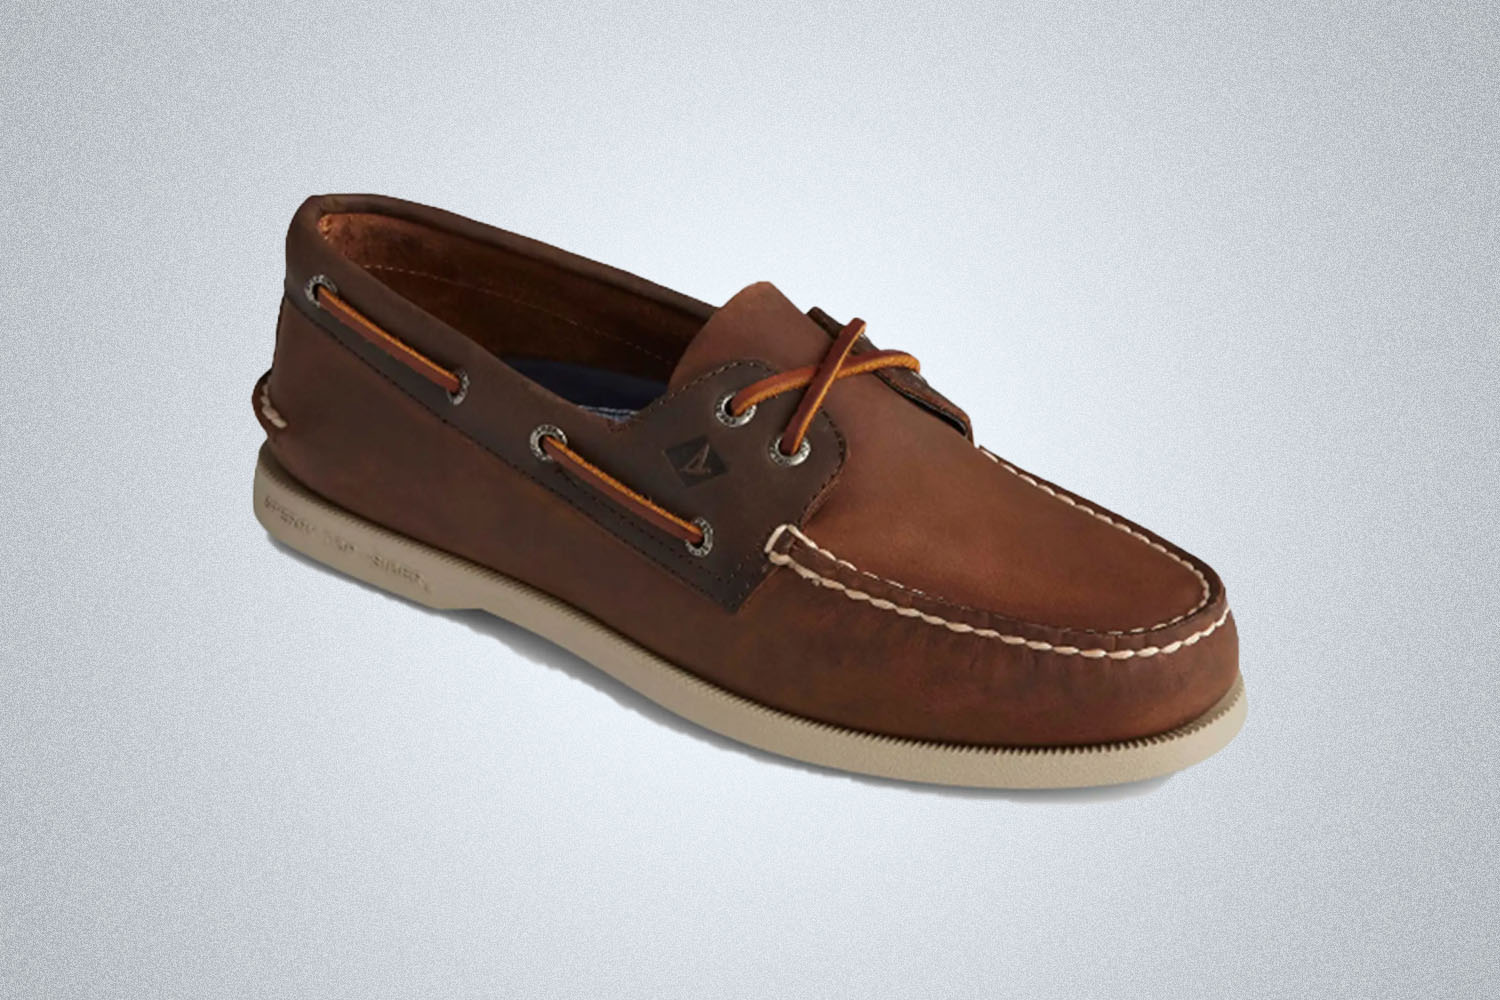 a brown leather boat shoe from Sperry on a grey background 